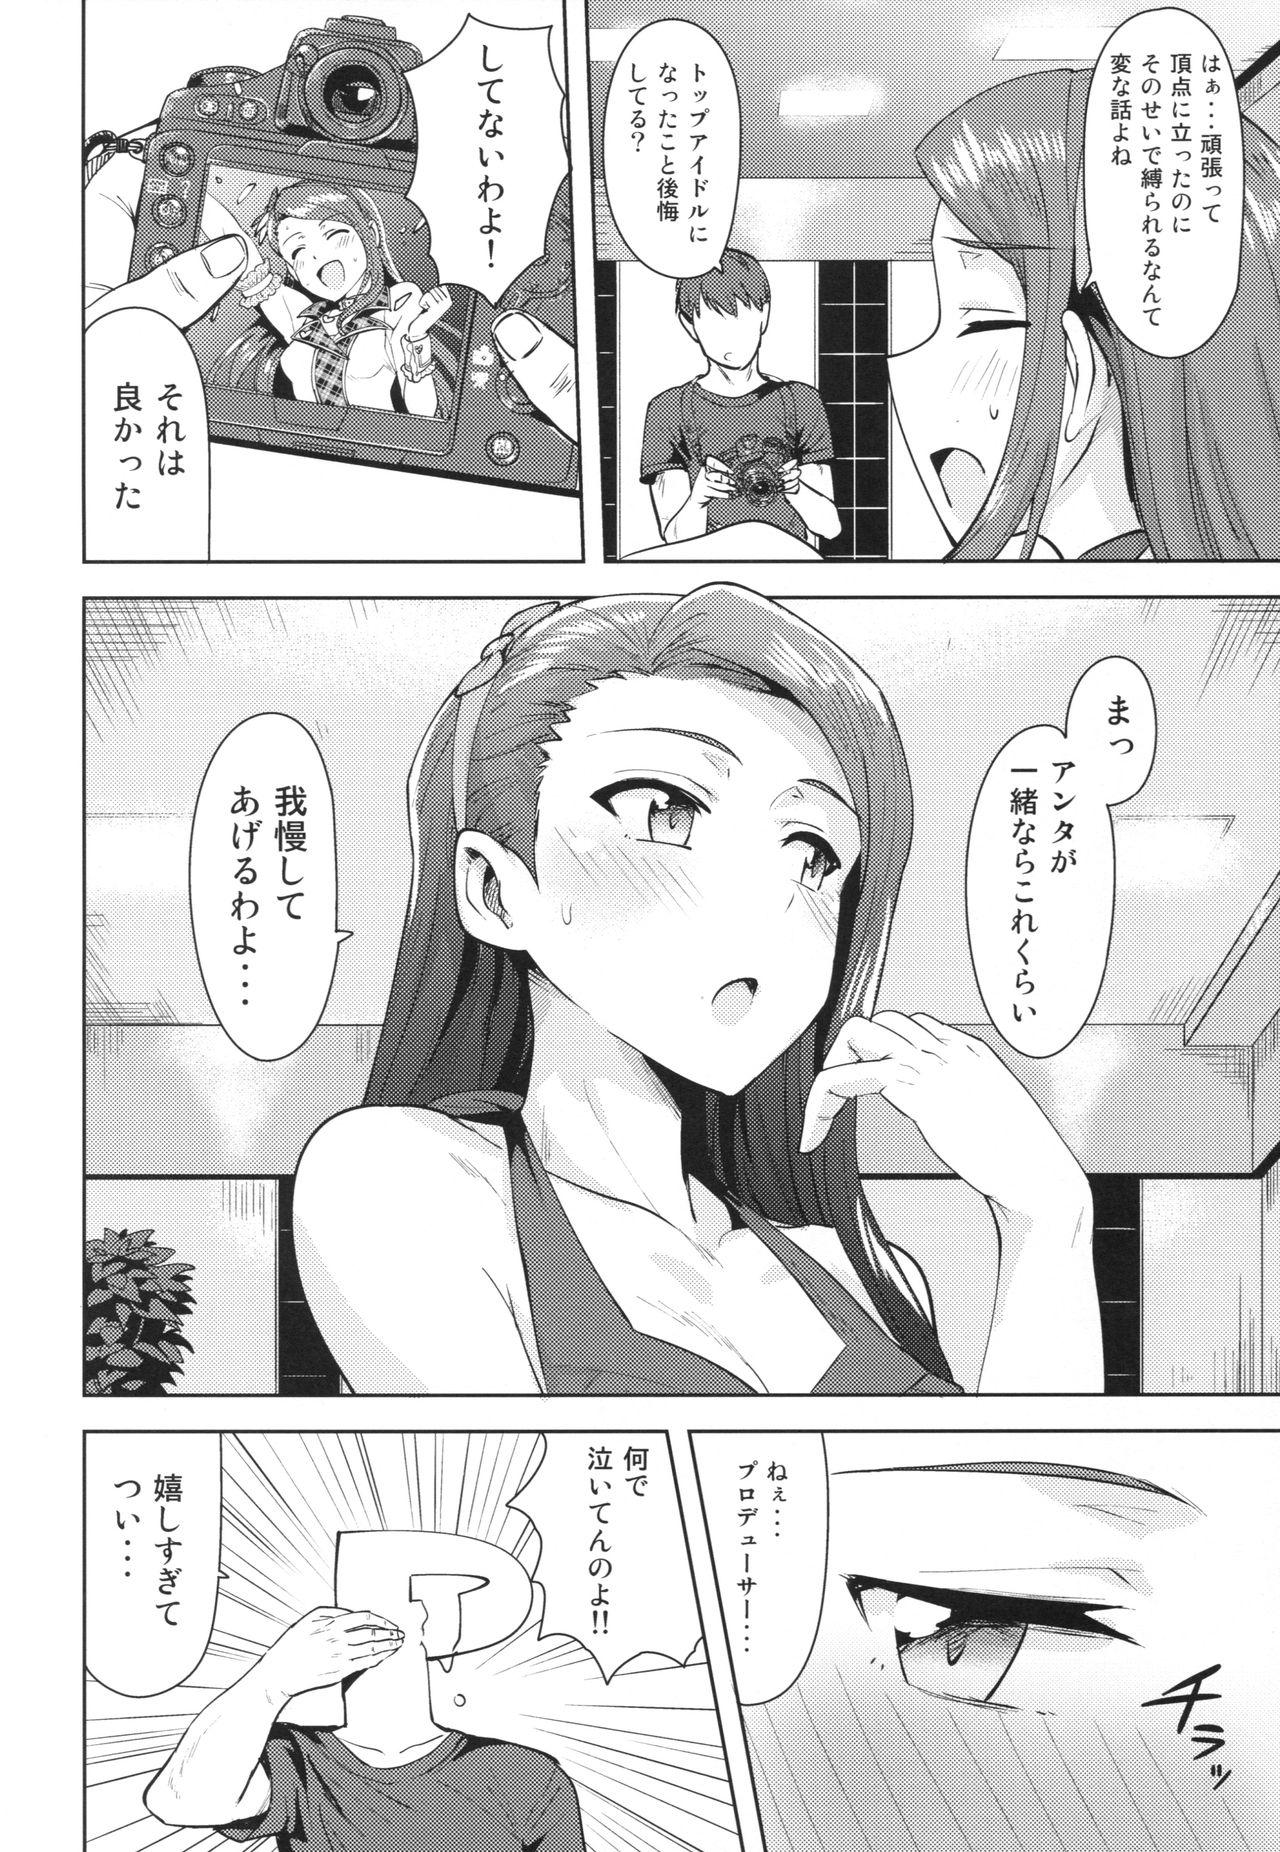 Friends Ama-Ama Iorin 2 - The idolmaster Solo Girl - Page 3